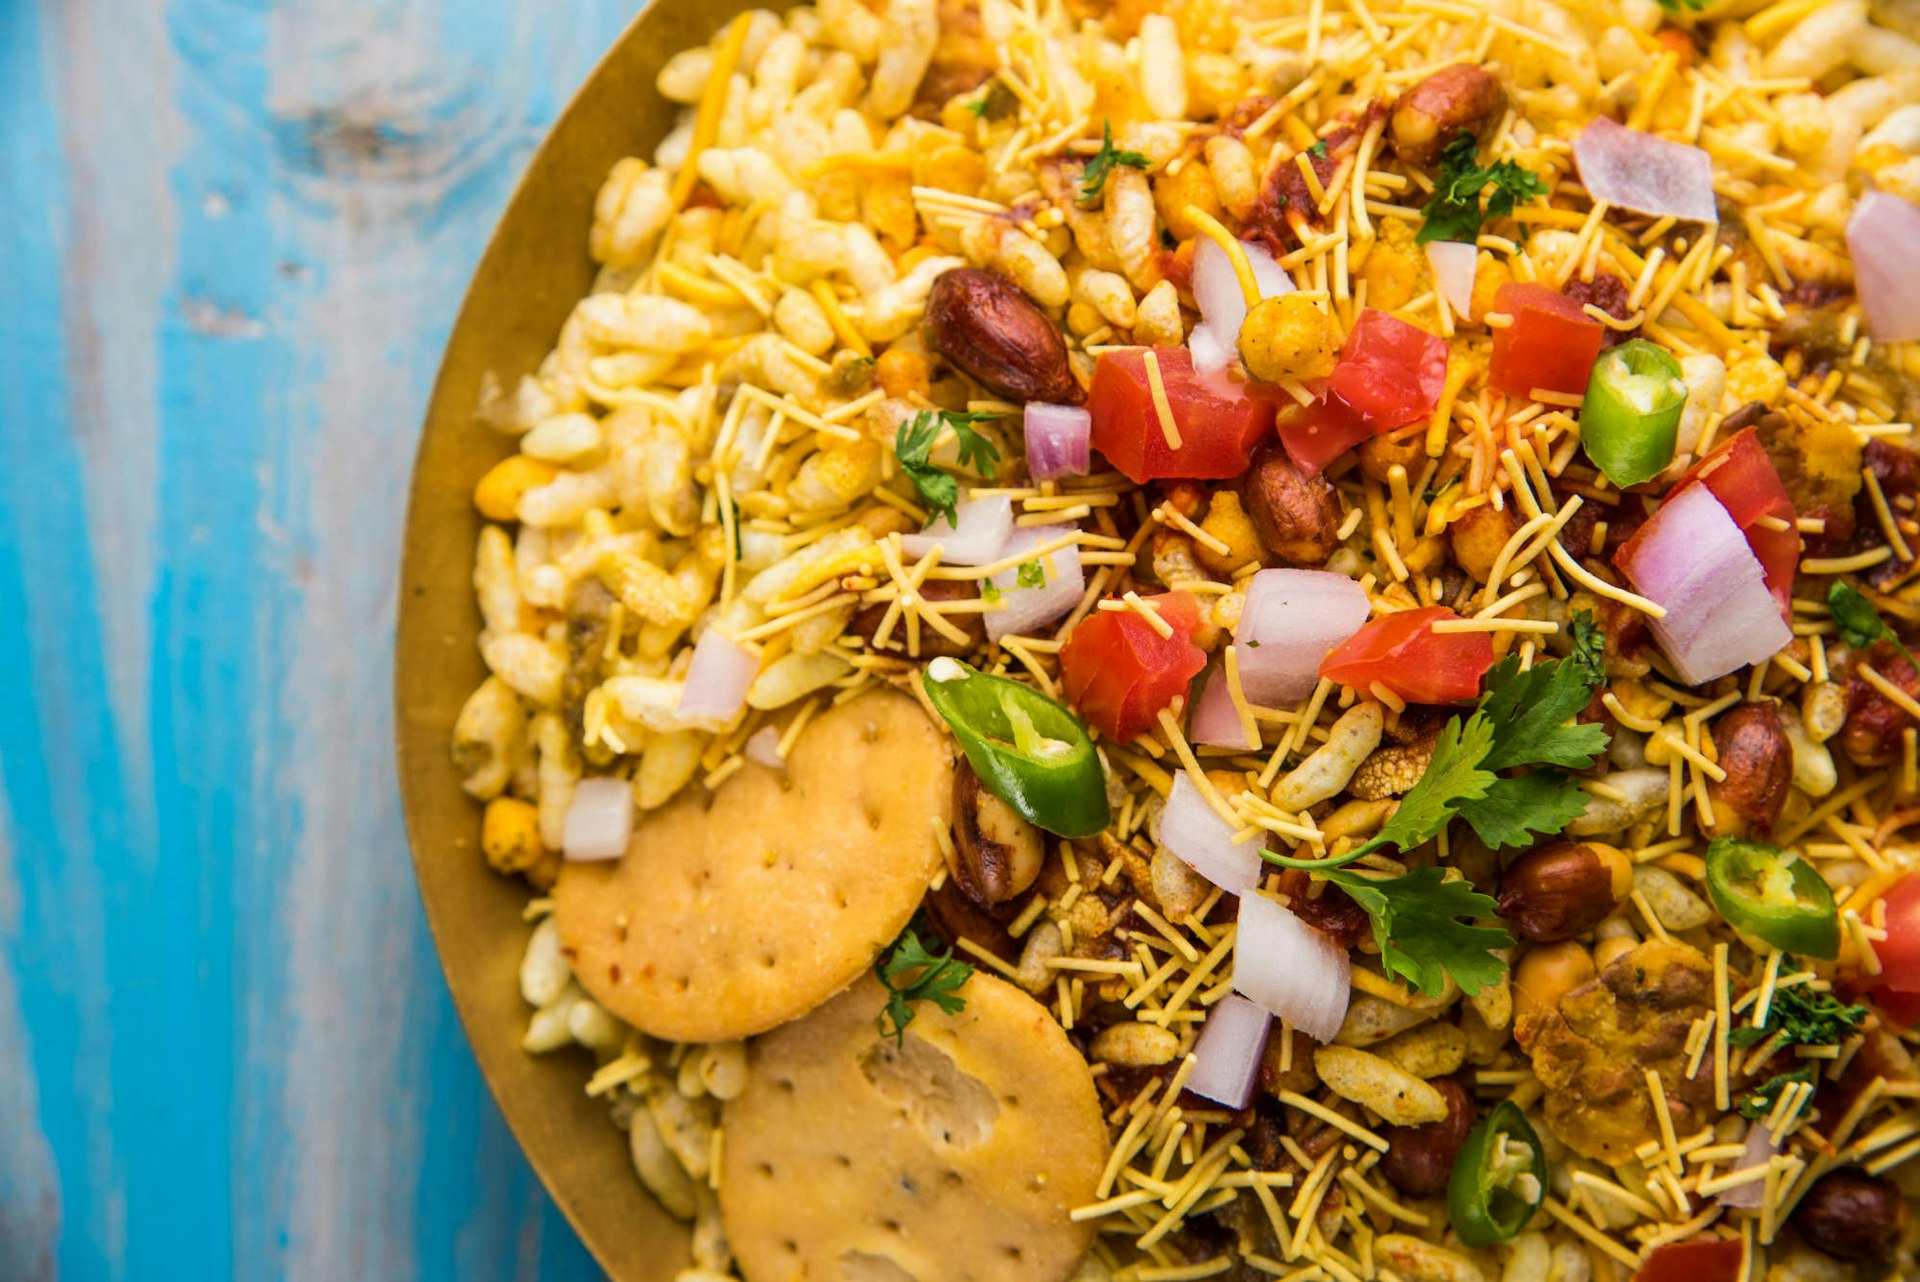 Mumbai's favourite street snack, bhel puri is now a big hit on the streets of Delhi